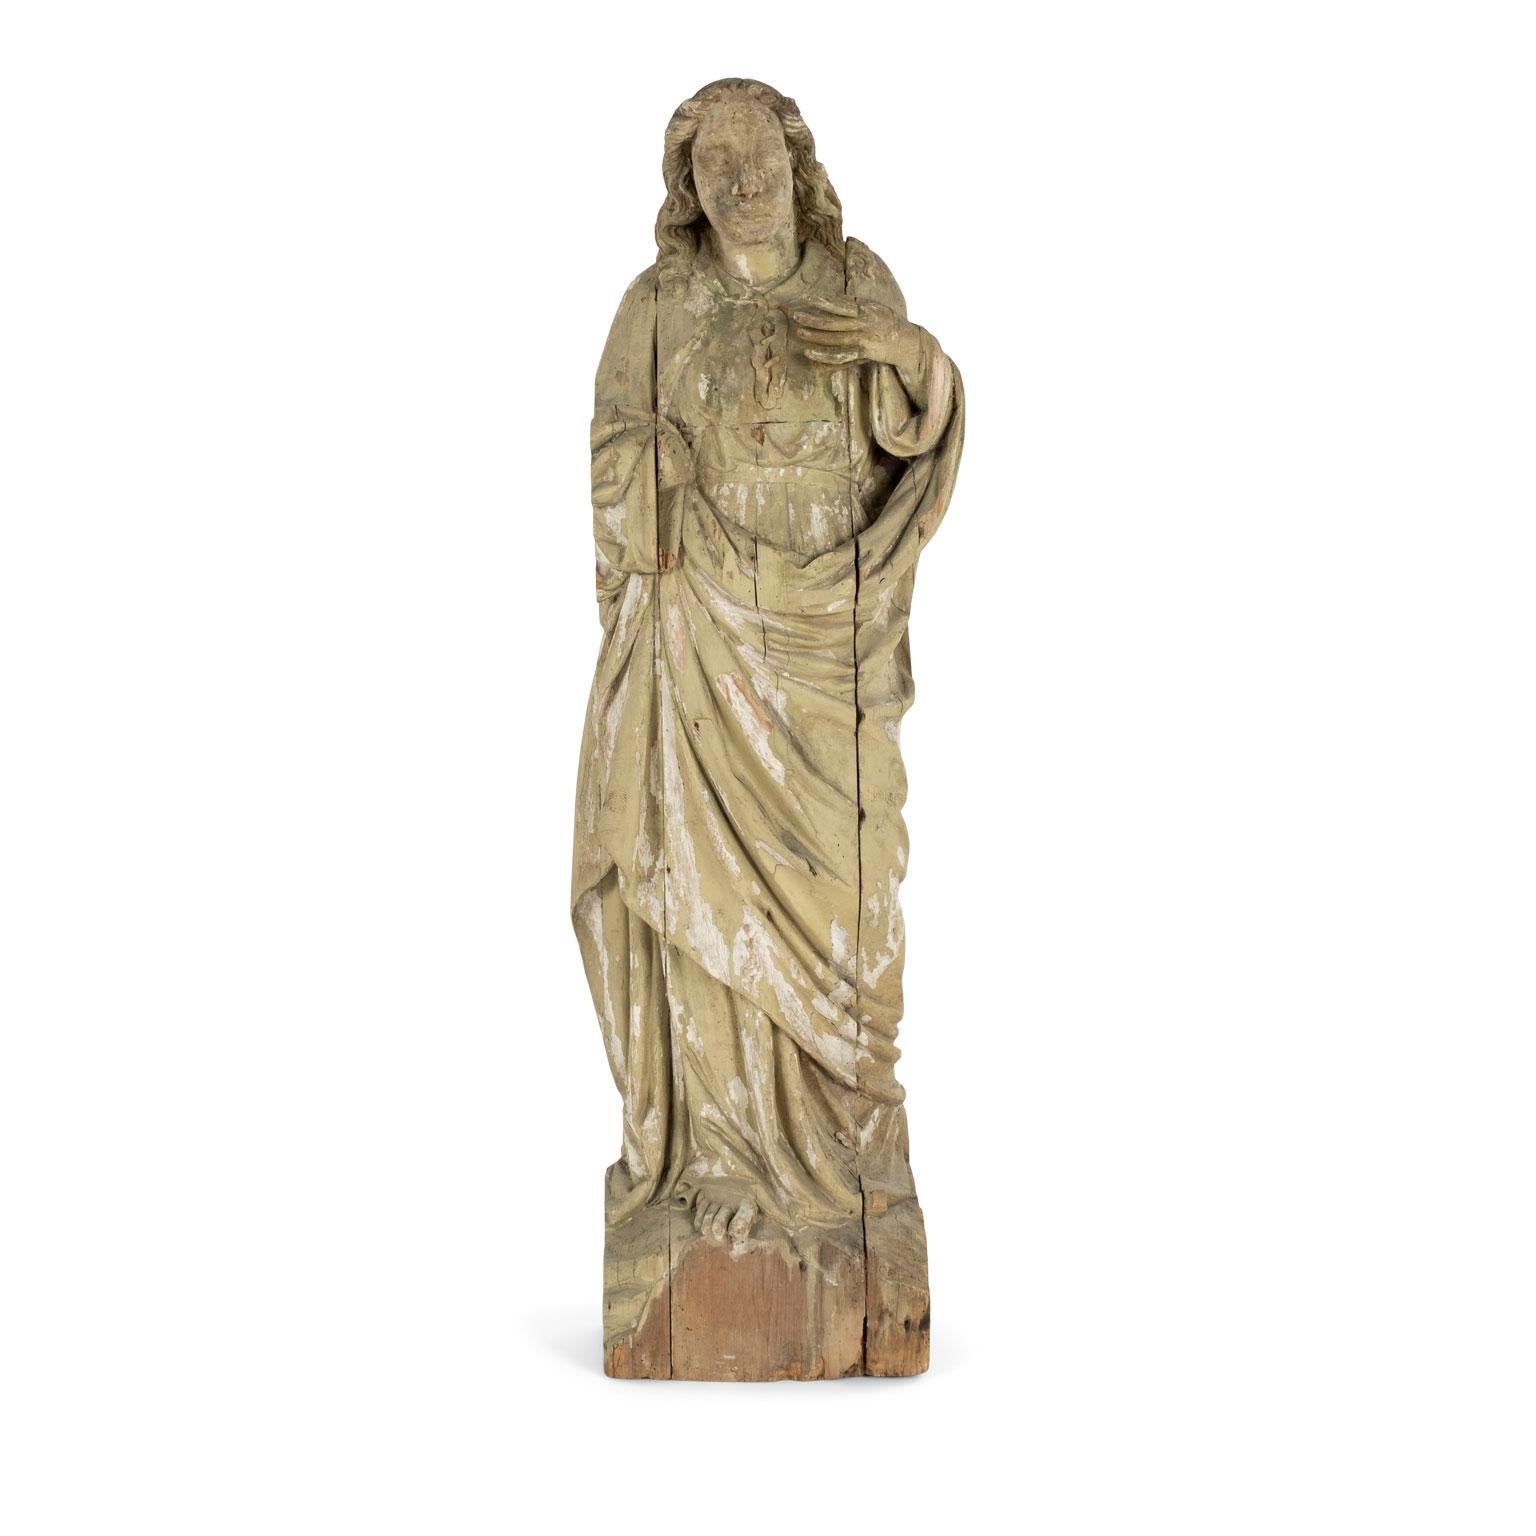 Large statue of saint hand carved in wood during the late 17th century, or early 18th century. Some restoration. Sculpture portrays a saint and originally used in a church or cathedral.

Note: Original/early finish on antique and vintage metal will